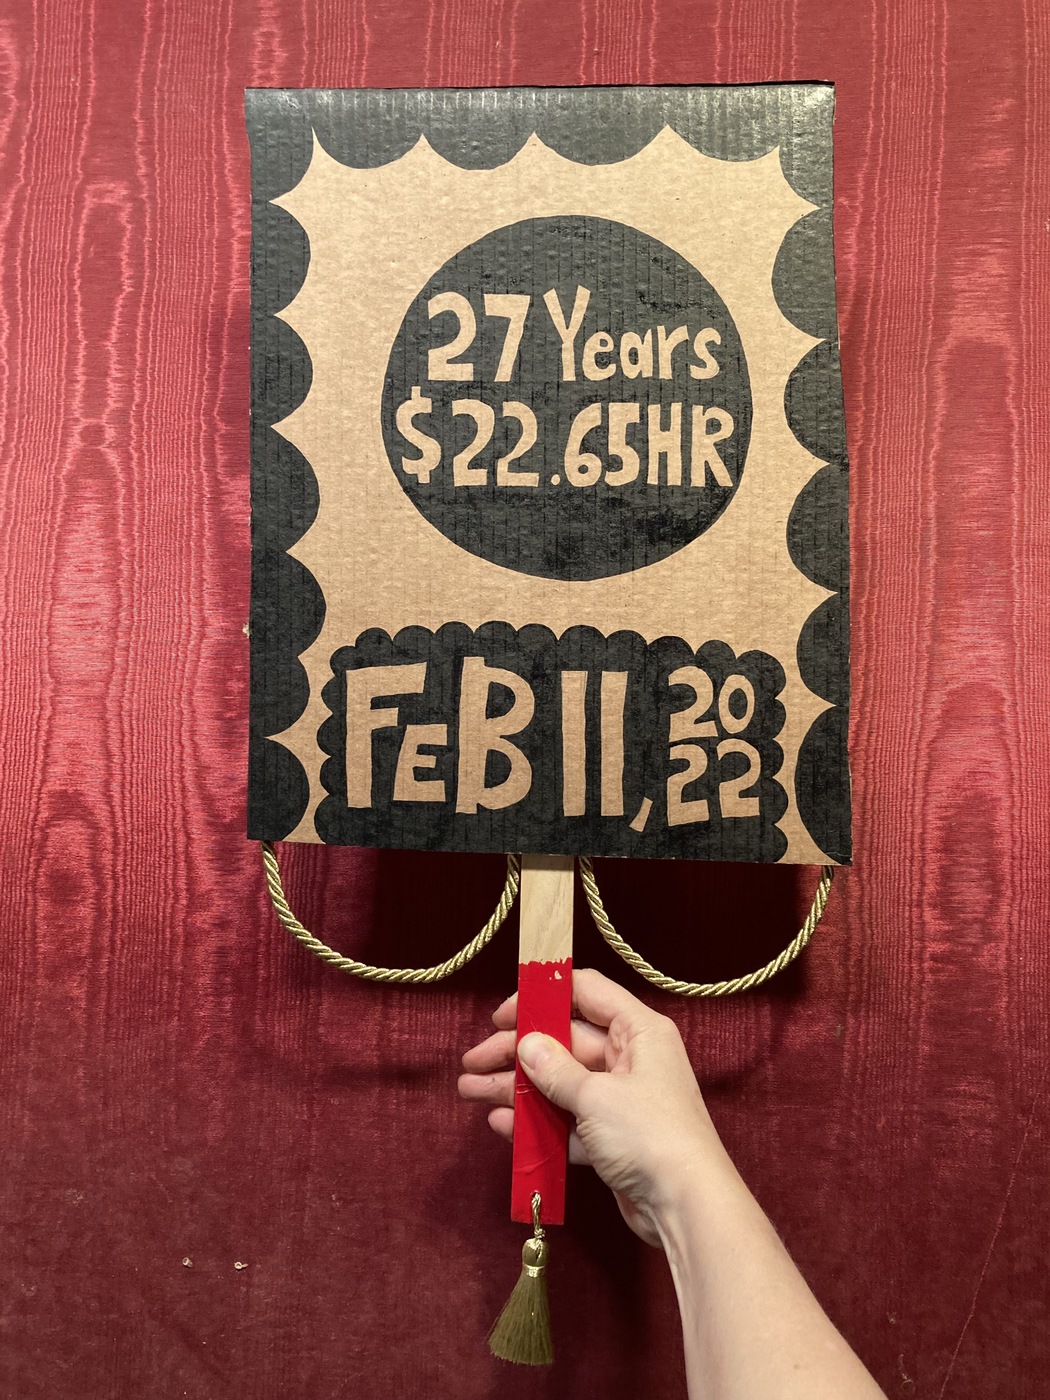 A cardboard picket sign is held by a light-skinned arm against a maroon, textured wall. It reads "27 Years, $22.65/hr" in a black circle and below that "Feb 11, 2022." It is decorated in a scalloped black-ink border. The sign's handle is painted red and has a gold tassel hanging from its bottom.